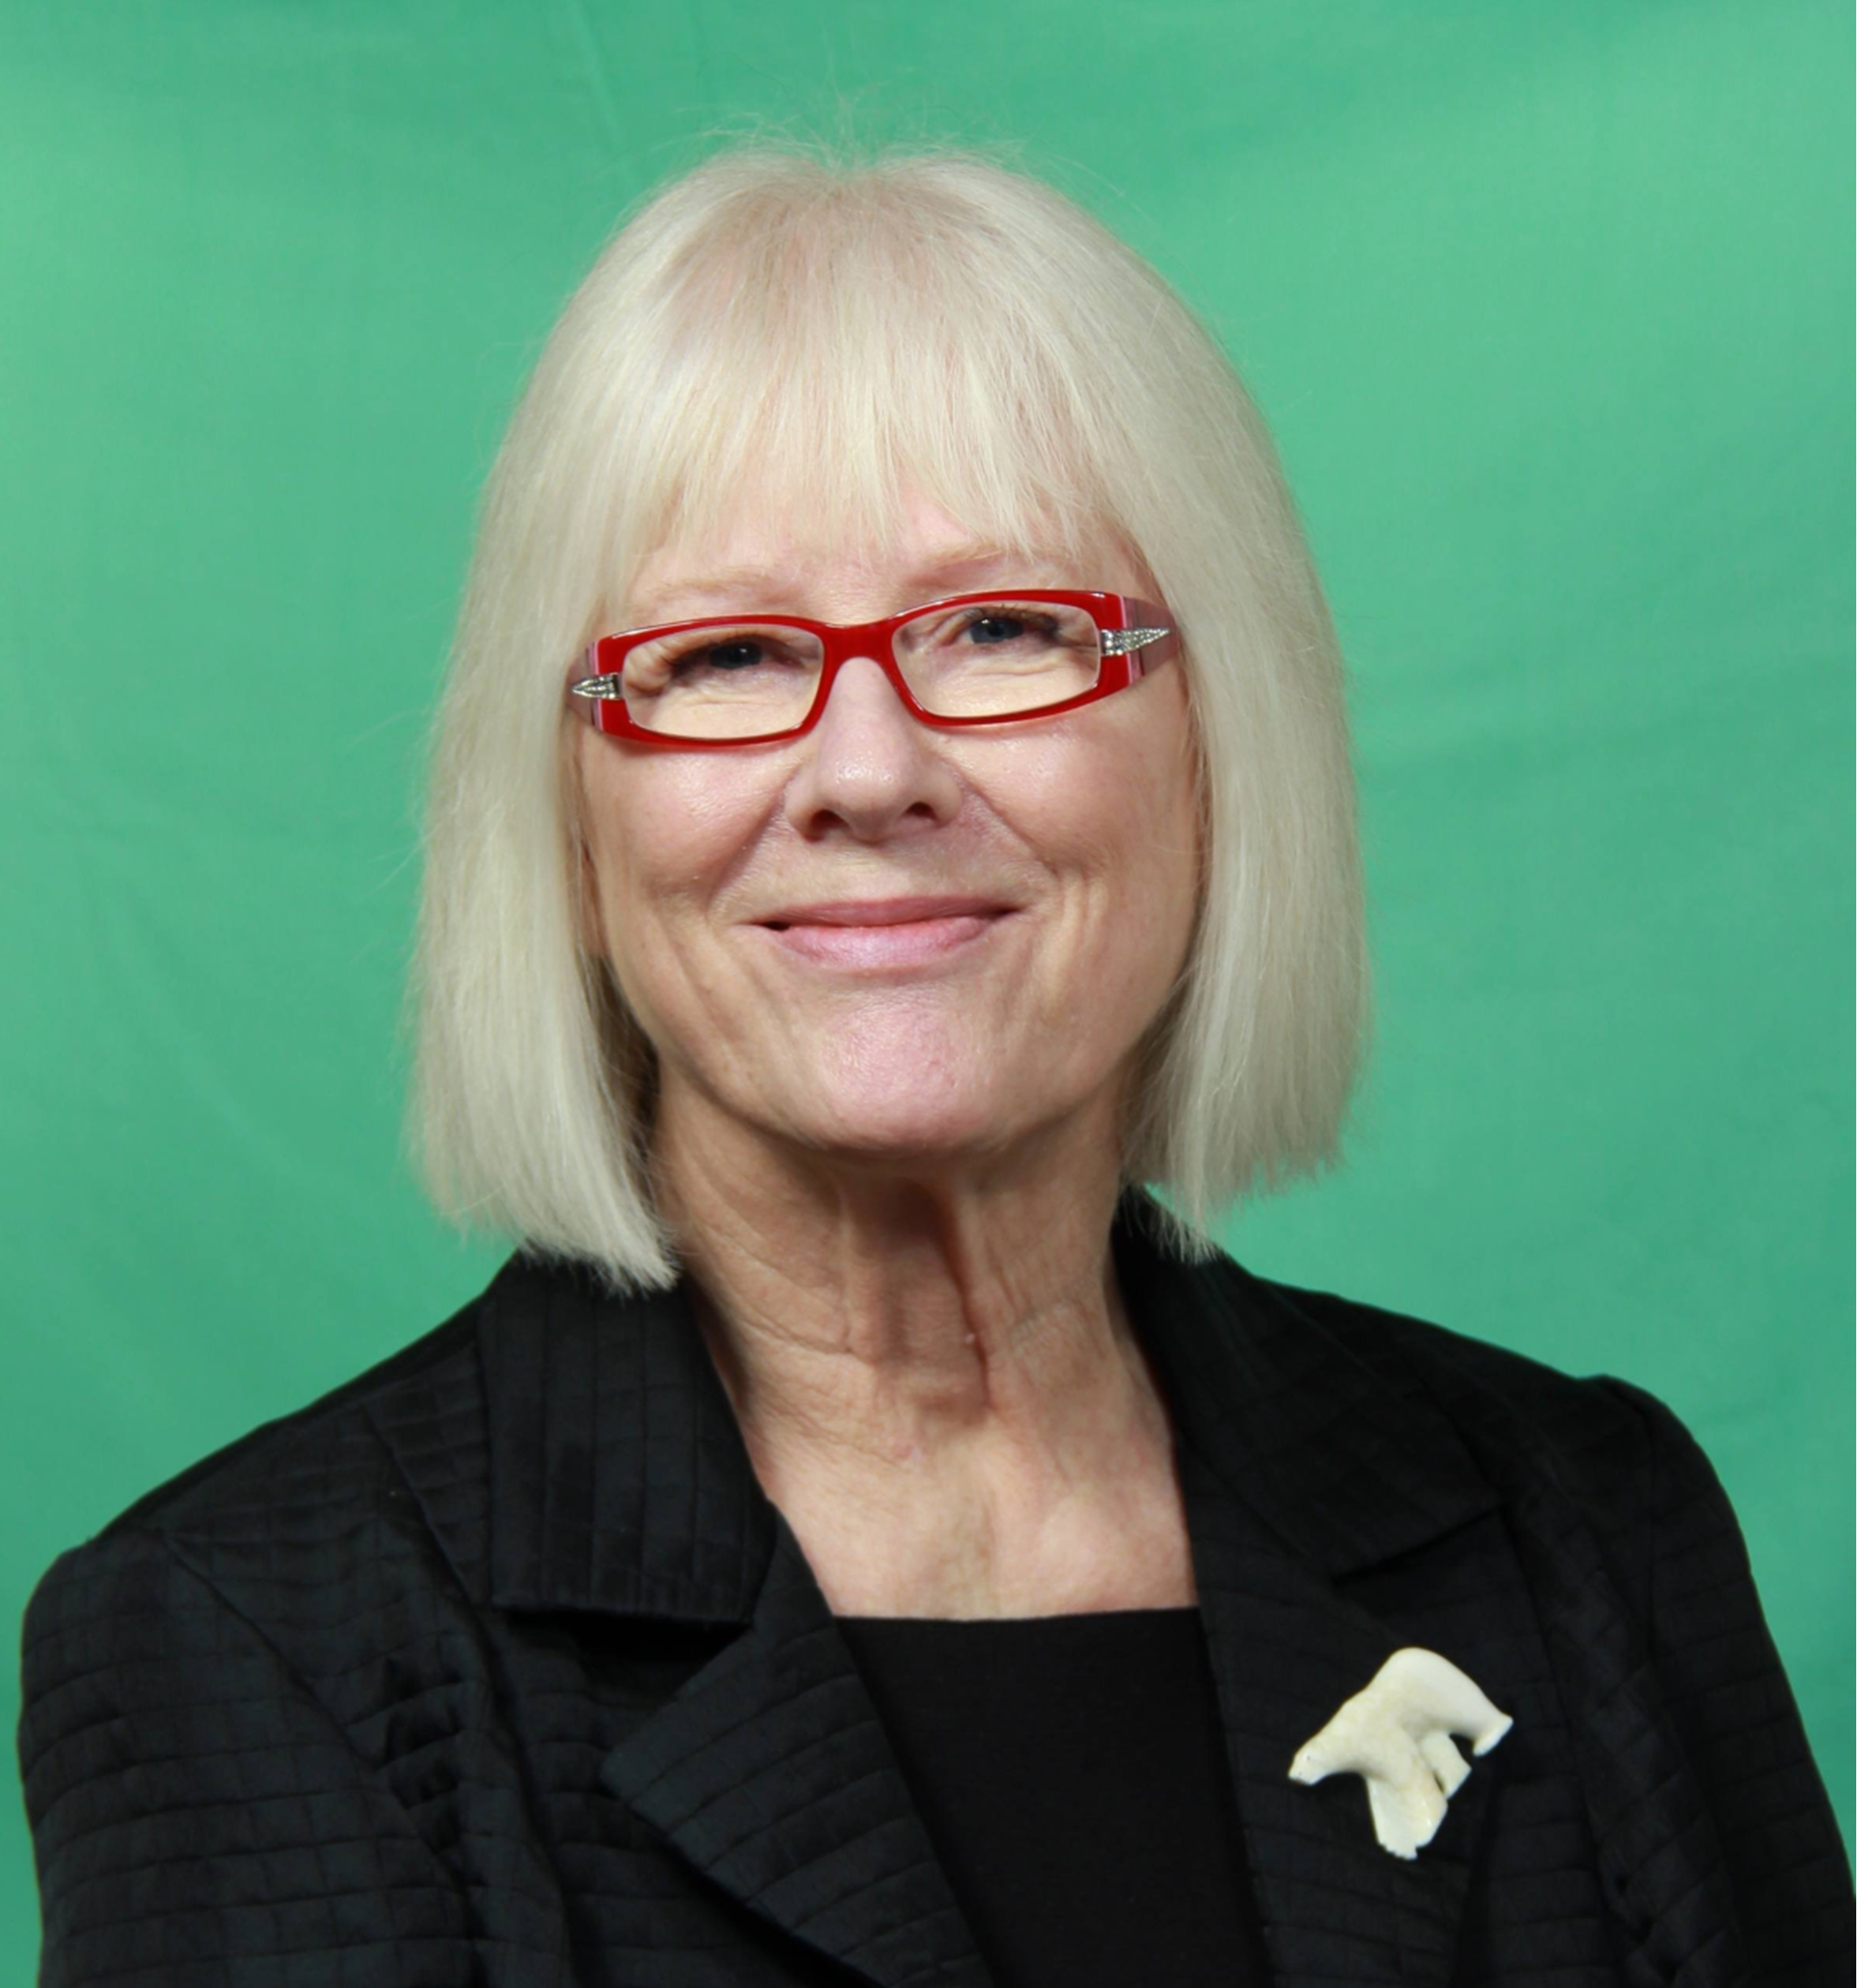 Tanny Nadon, volunteer, headshot of an older white woman with short white hair and red glasses in a black suit.